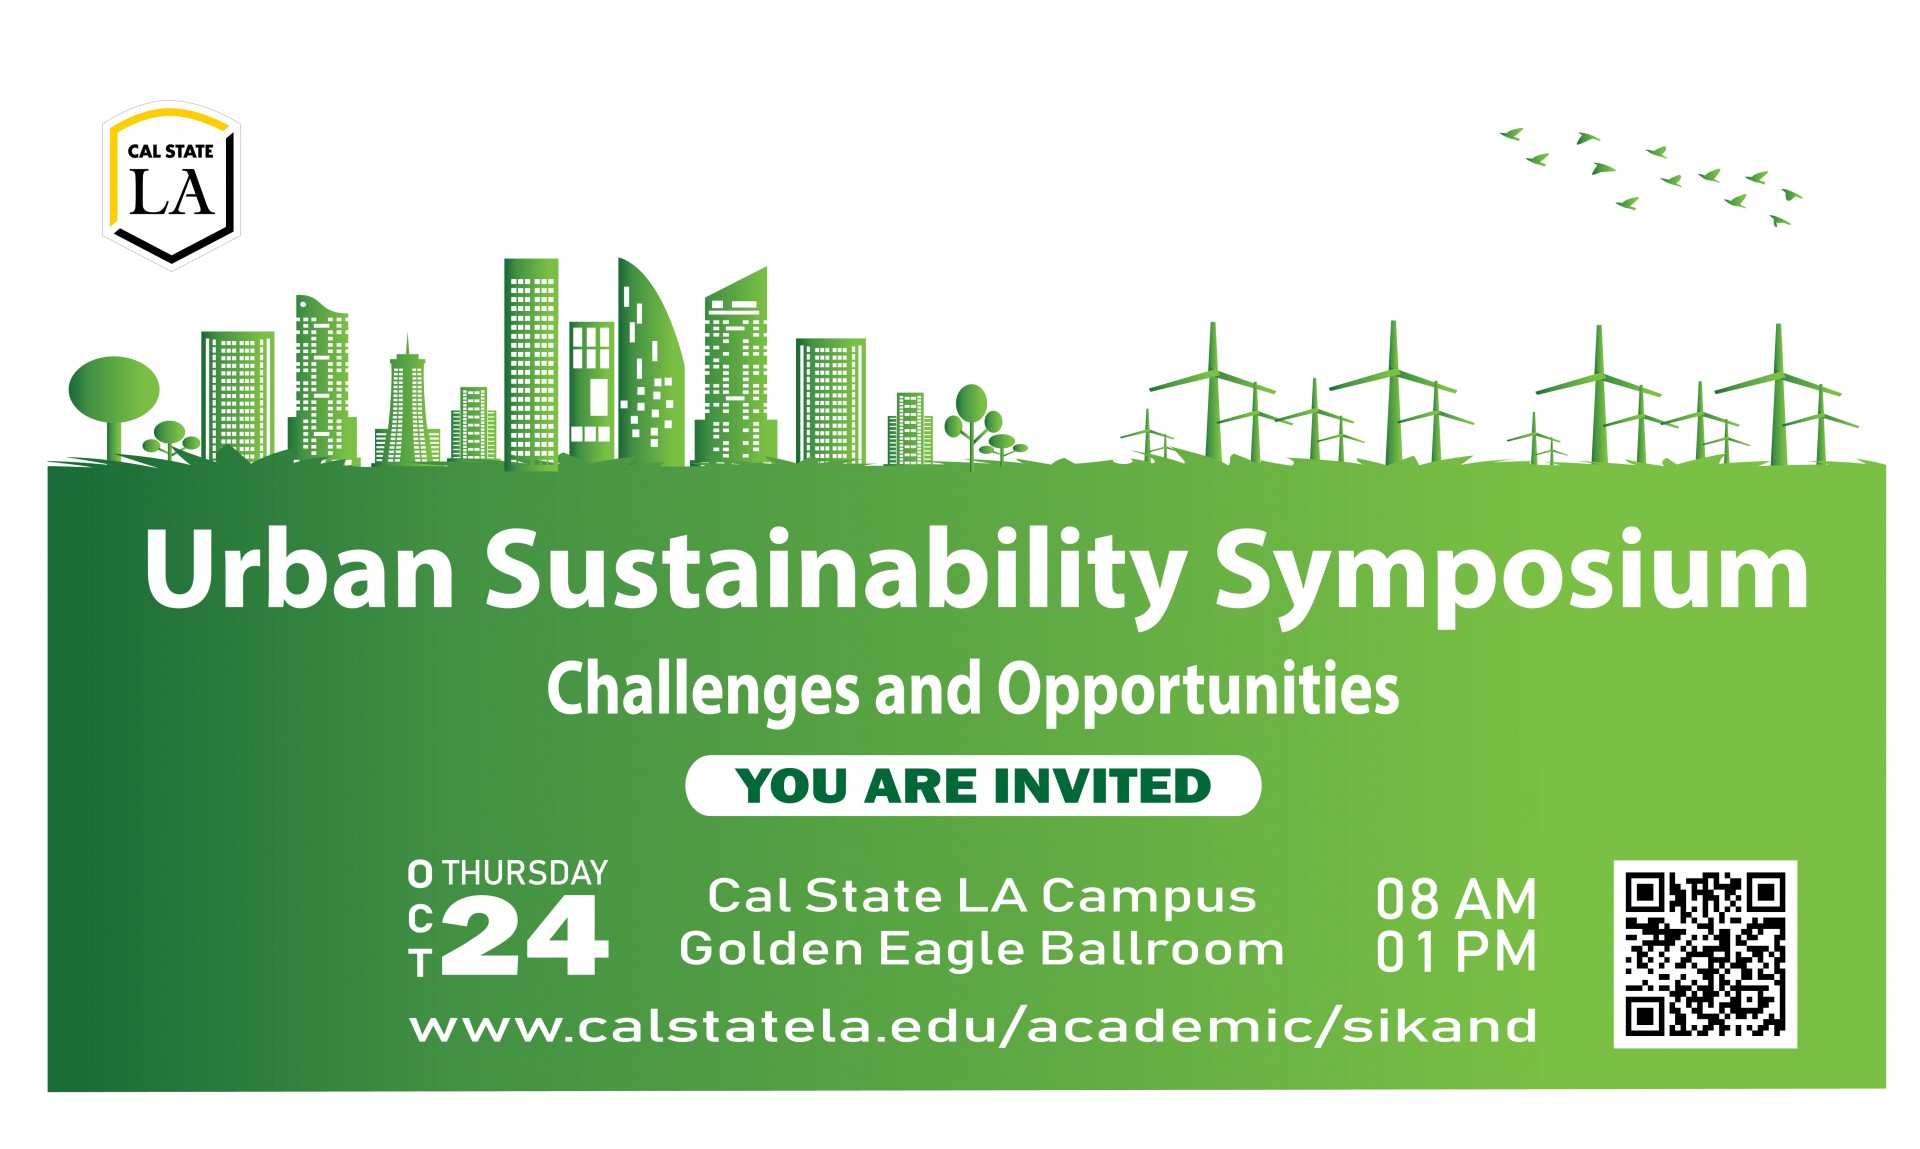 Urban Sustainability Symposium Challenges and Opportunities Oct 24 at Cal State LA 